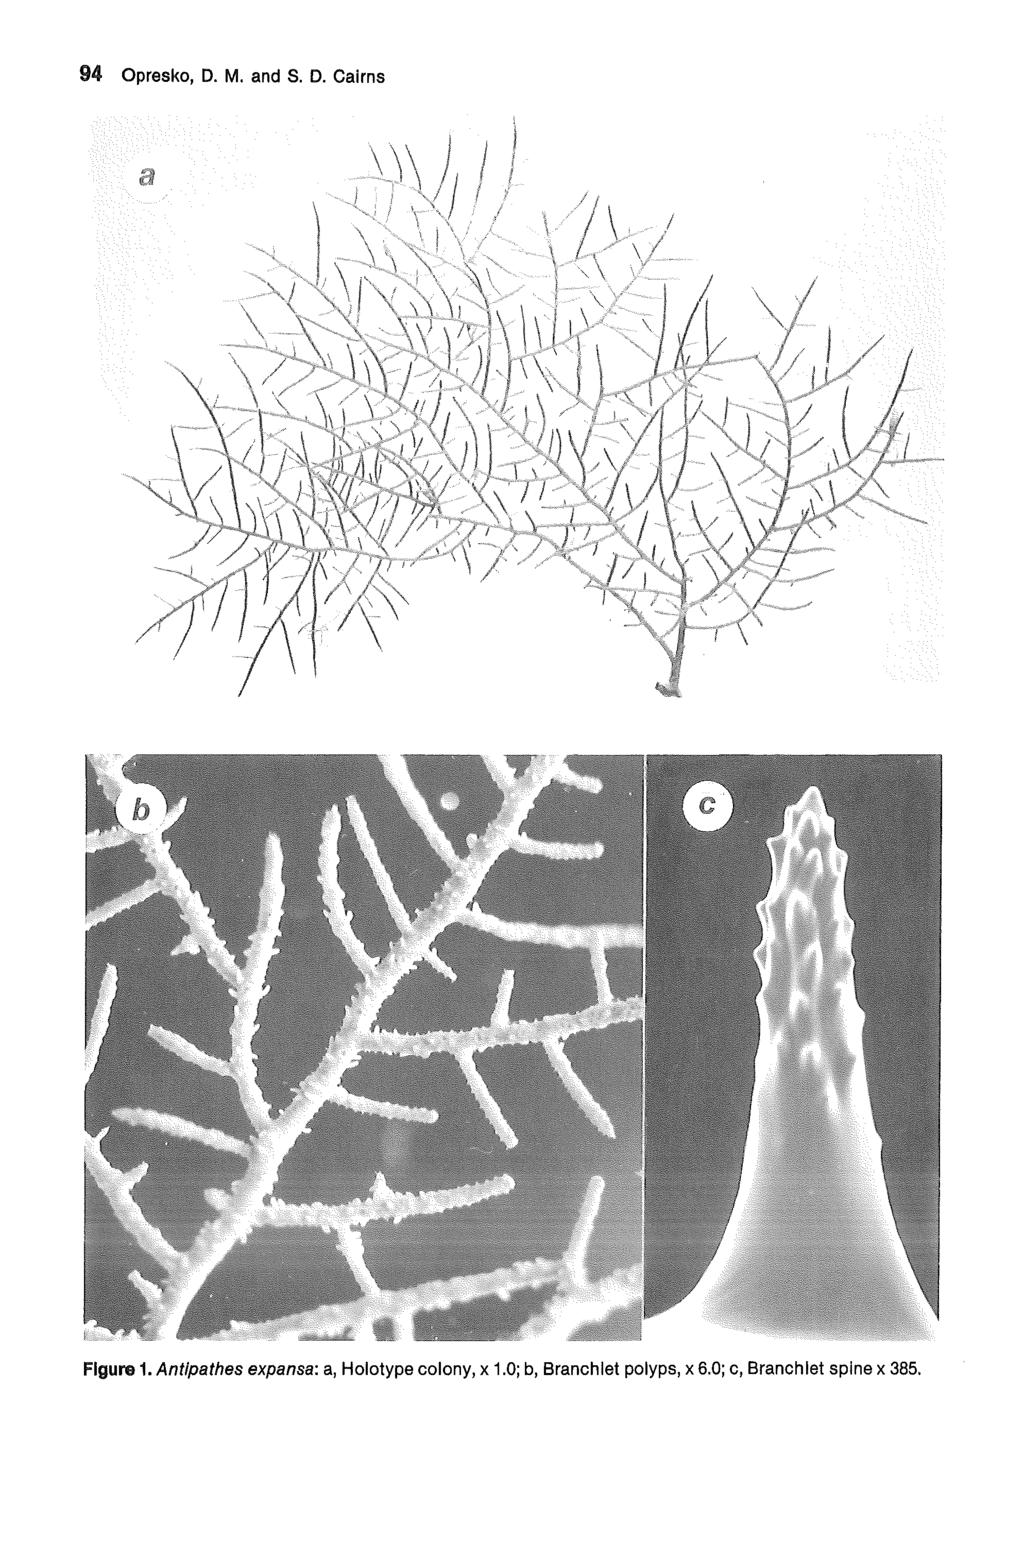 94 Opresko, D. M. and S. D. Cairns Gulf of Mexico Science, Vol. 12 [1991], No. 2, Art. 2 Figure 1.